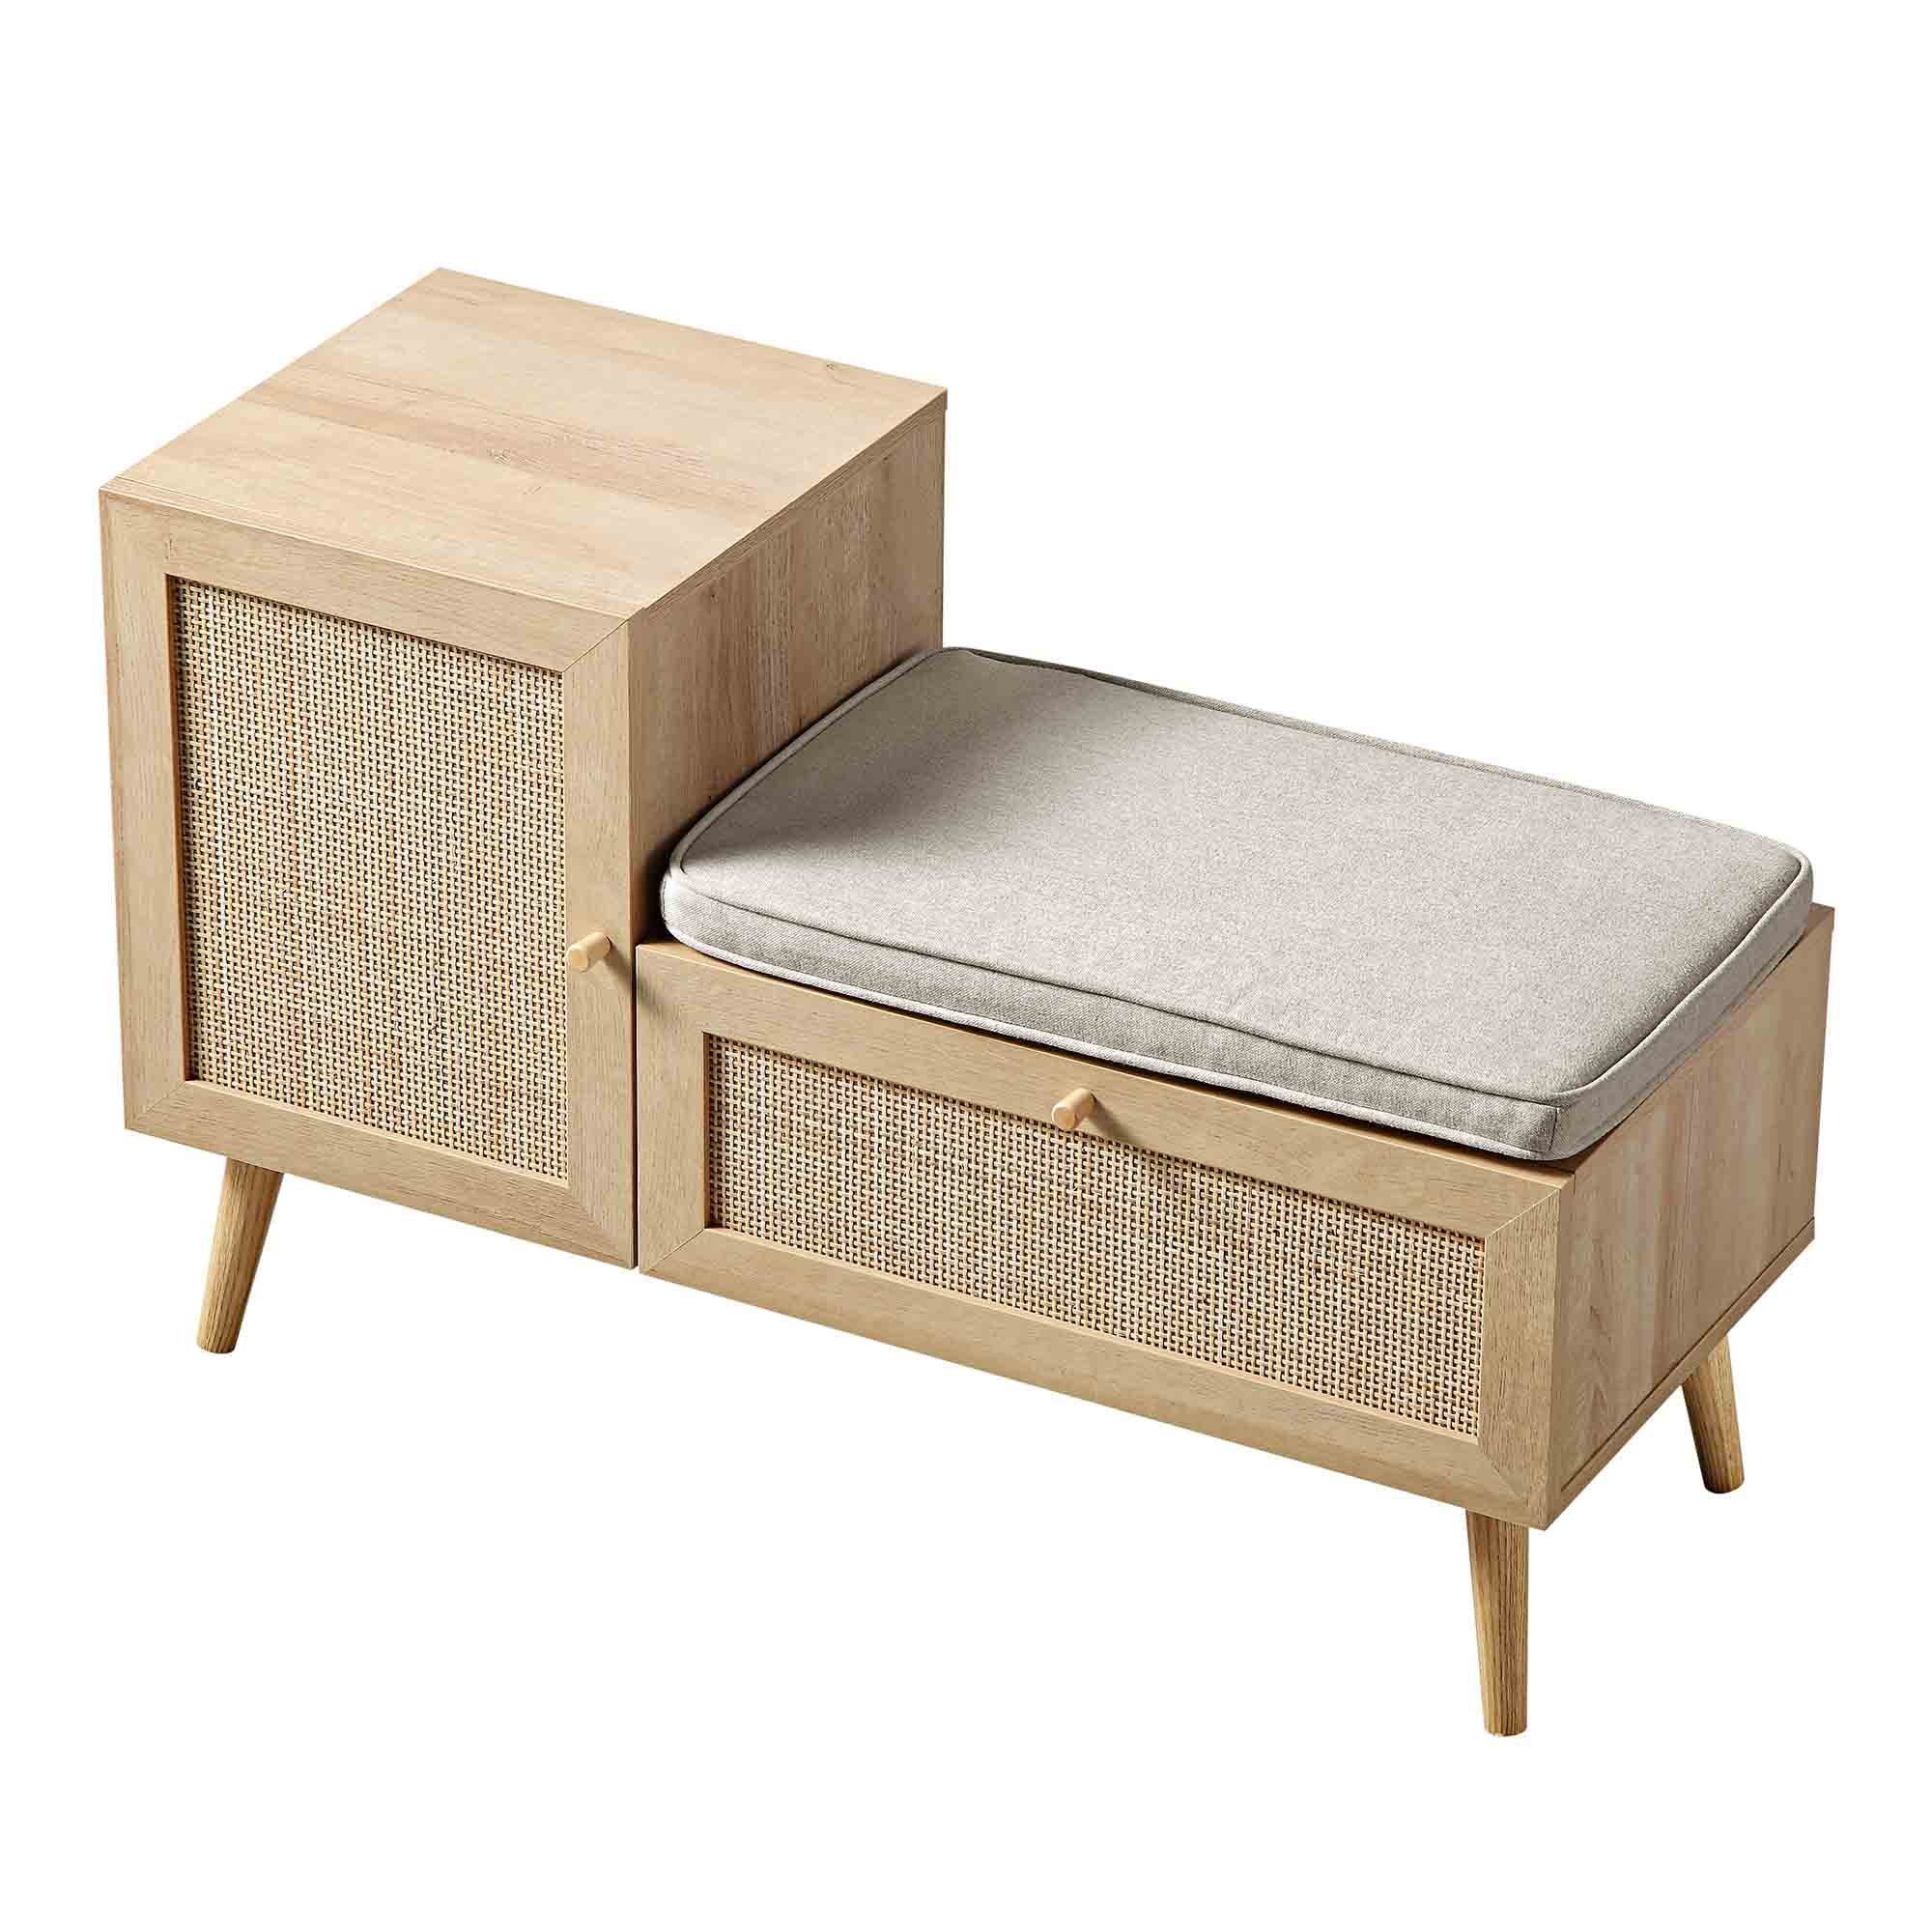 Frances Woven Rattan Storage Bench with Cushion, Natural